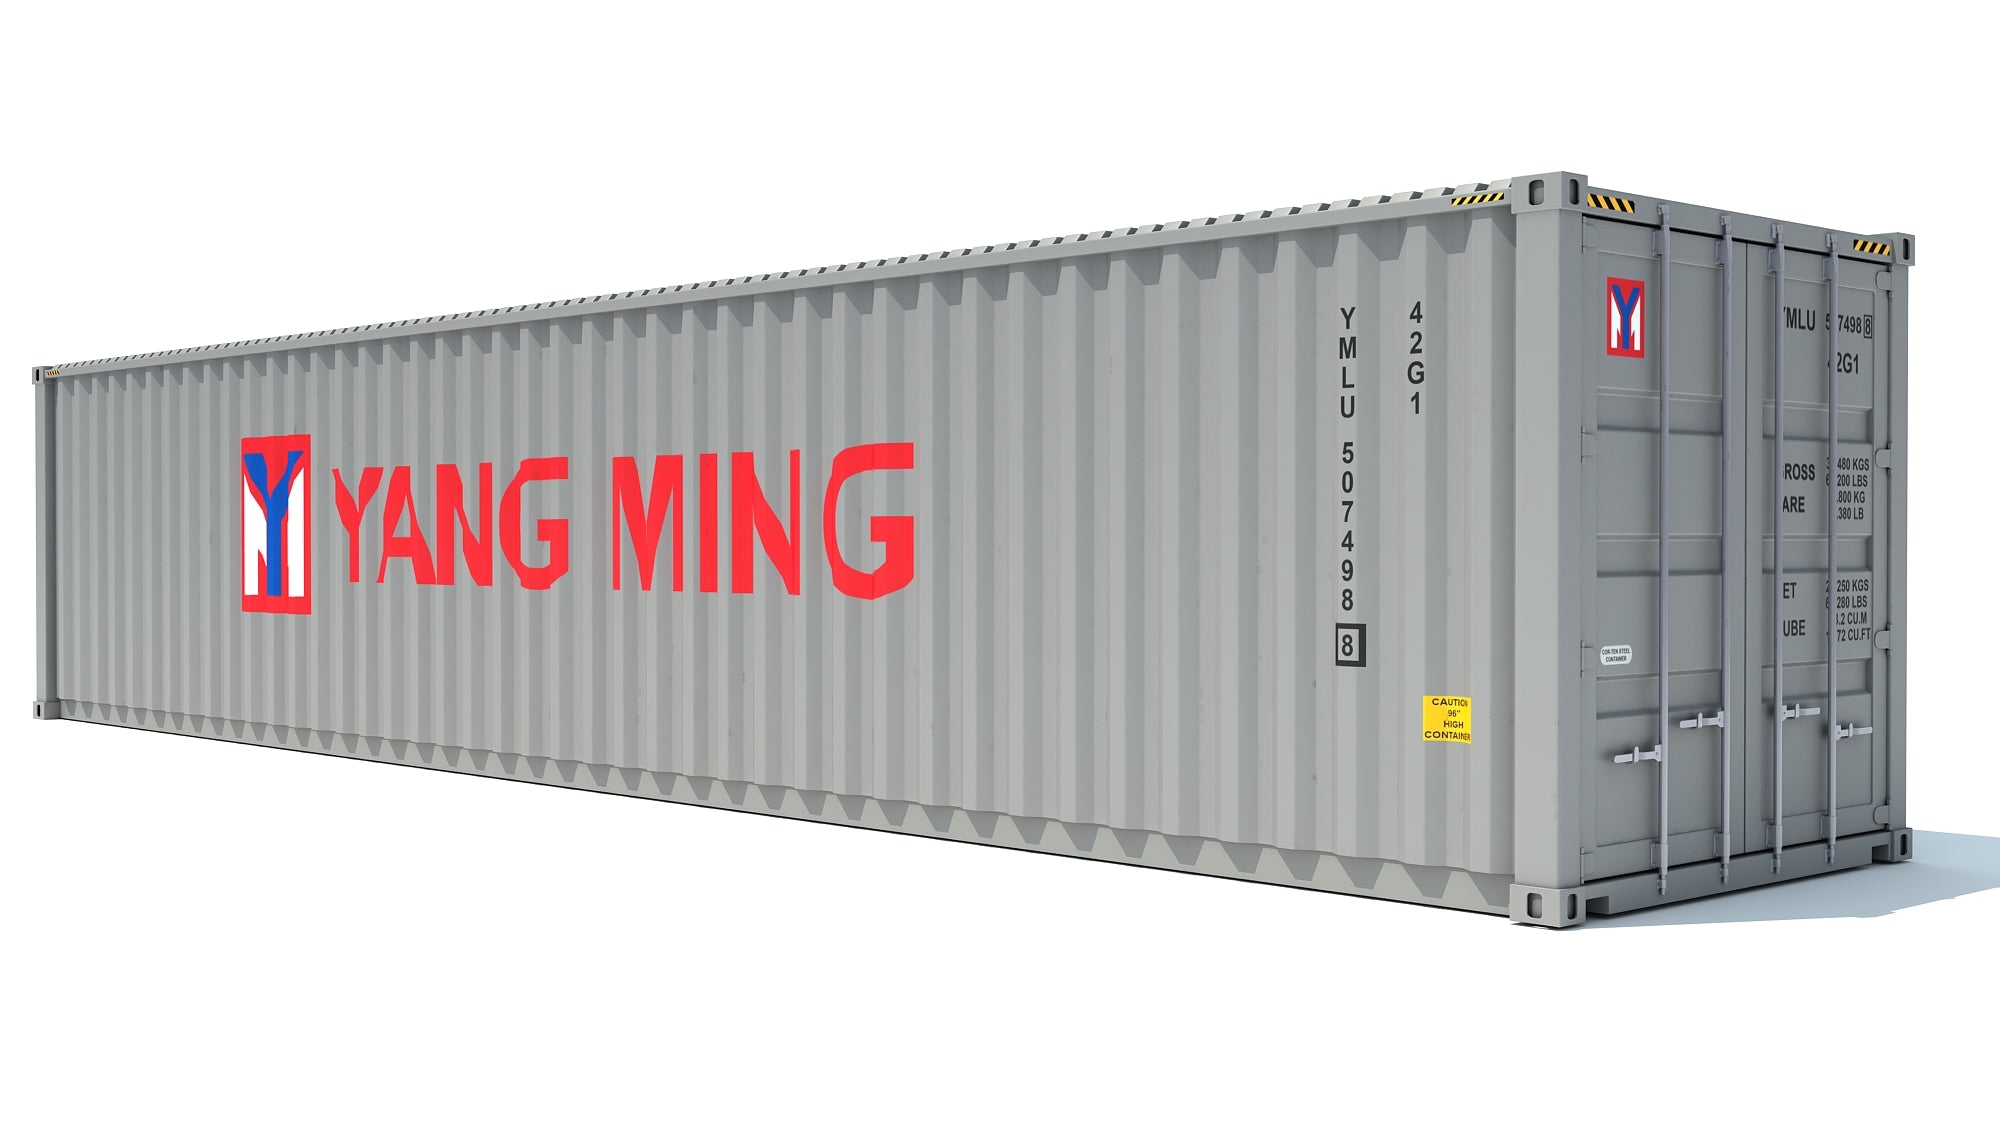 Shipping Container Yang Ming